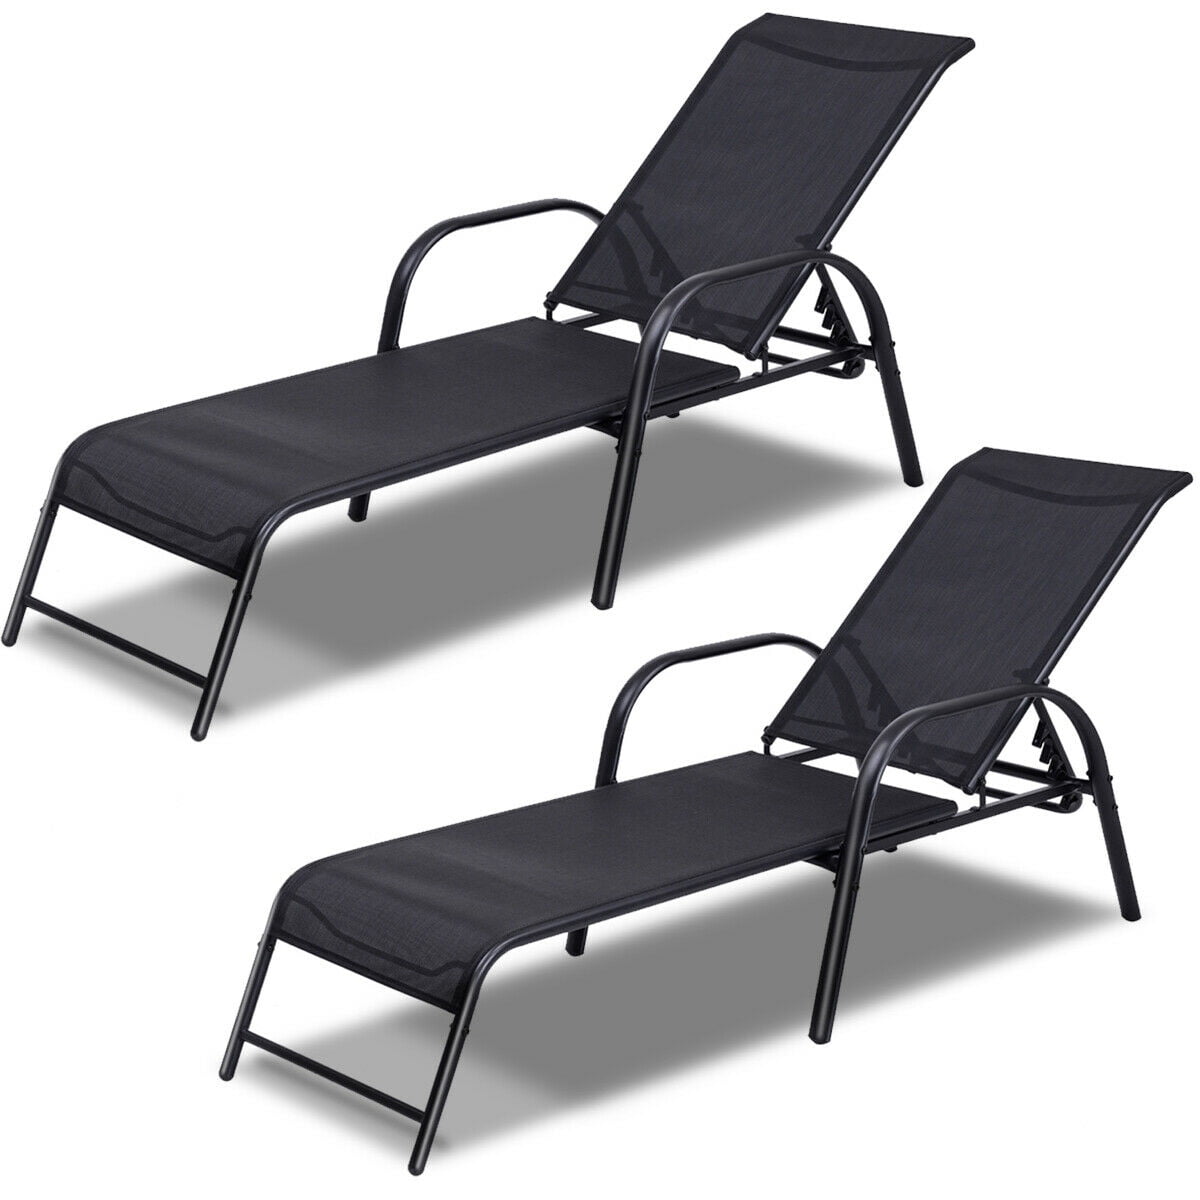 Costway Set of 2 Patio Lounge Chairs Sling Chaise Lounges Recliner